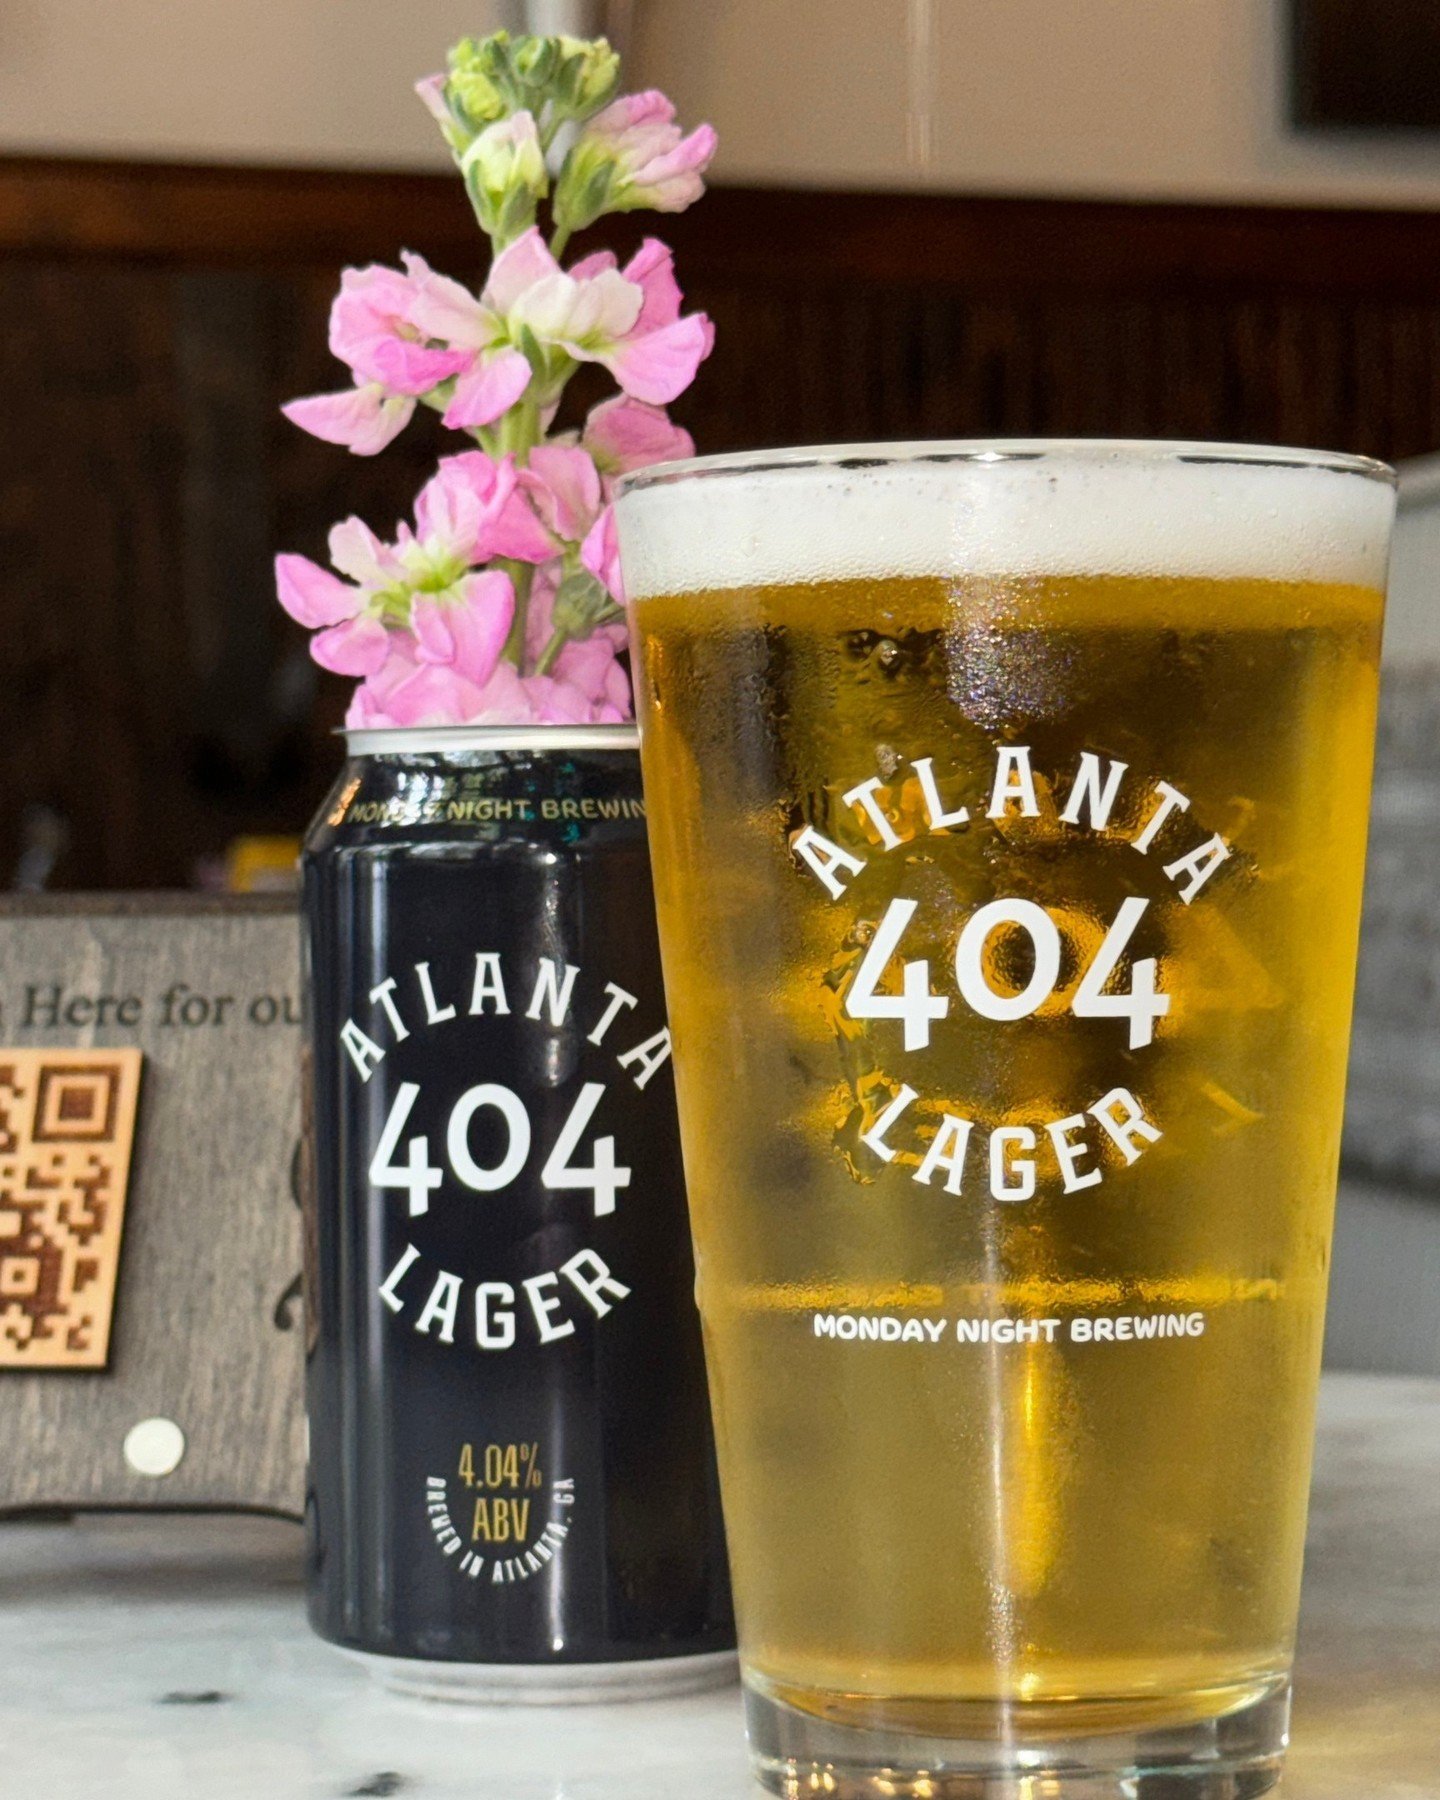 Happy 404 day! 🌆🎉 ⁠
Today only treat yourself to 404 Lager from our friends at Monday Night Brewing for only $4.04! 🍻⁠
⁠
What is the 404 lager you ask? It's a smooth, easy drinking beer, perfect for any occasion and is brewed in ATL by @mondaynigh